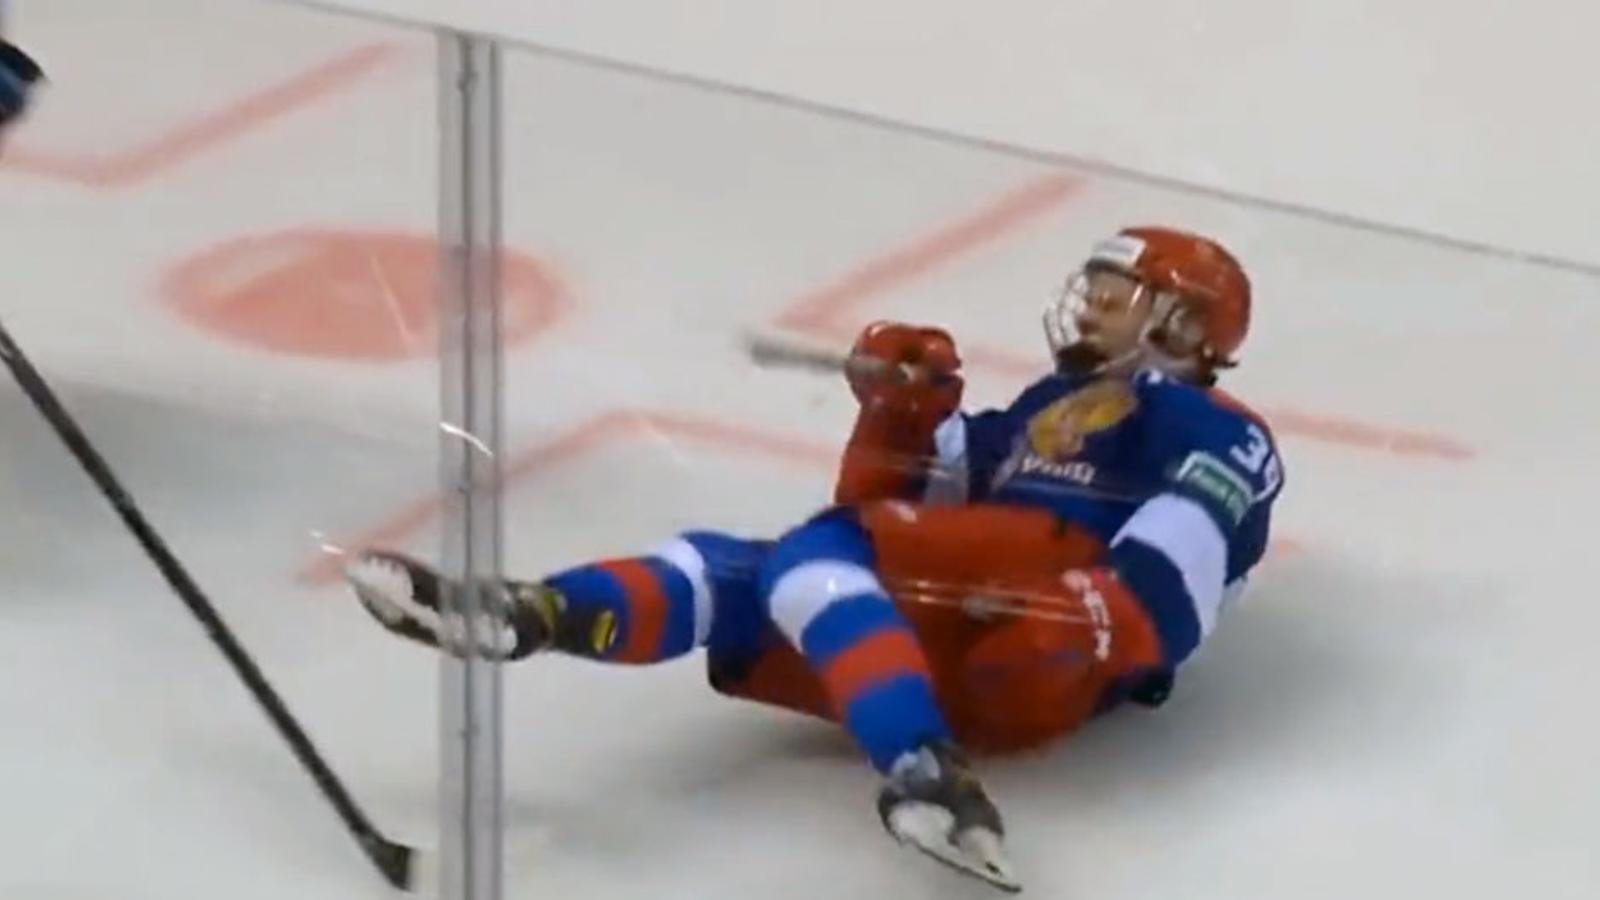 Potential #1 pick Matvei Michkov out long-term after huge hit from former NHLer Alexei Emelin